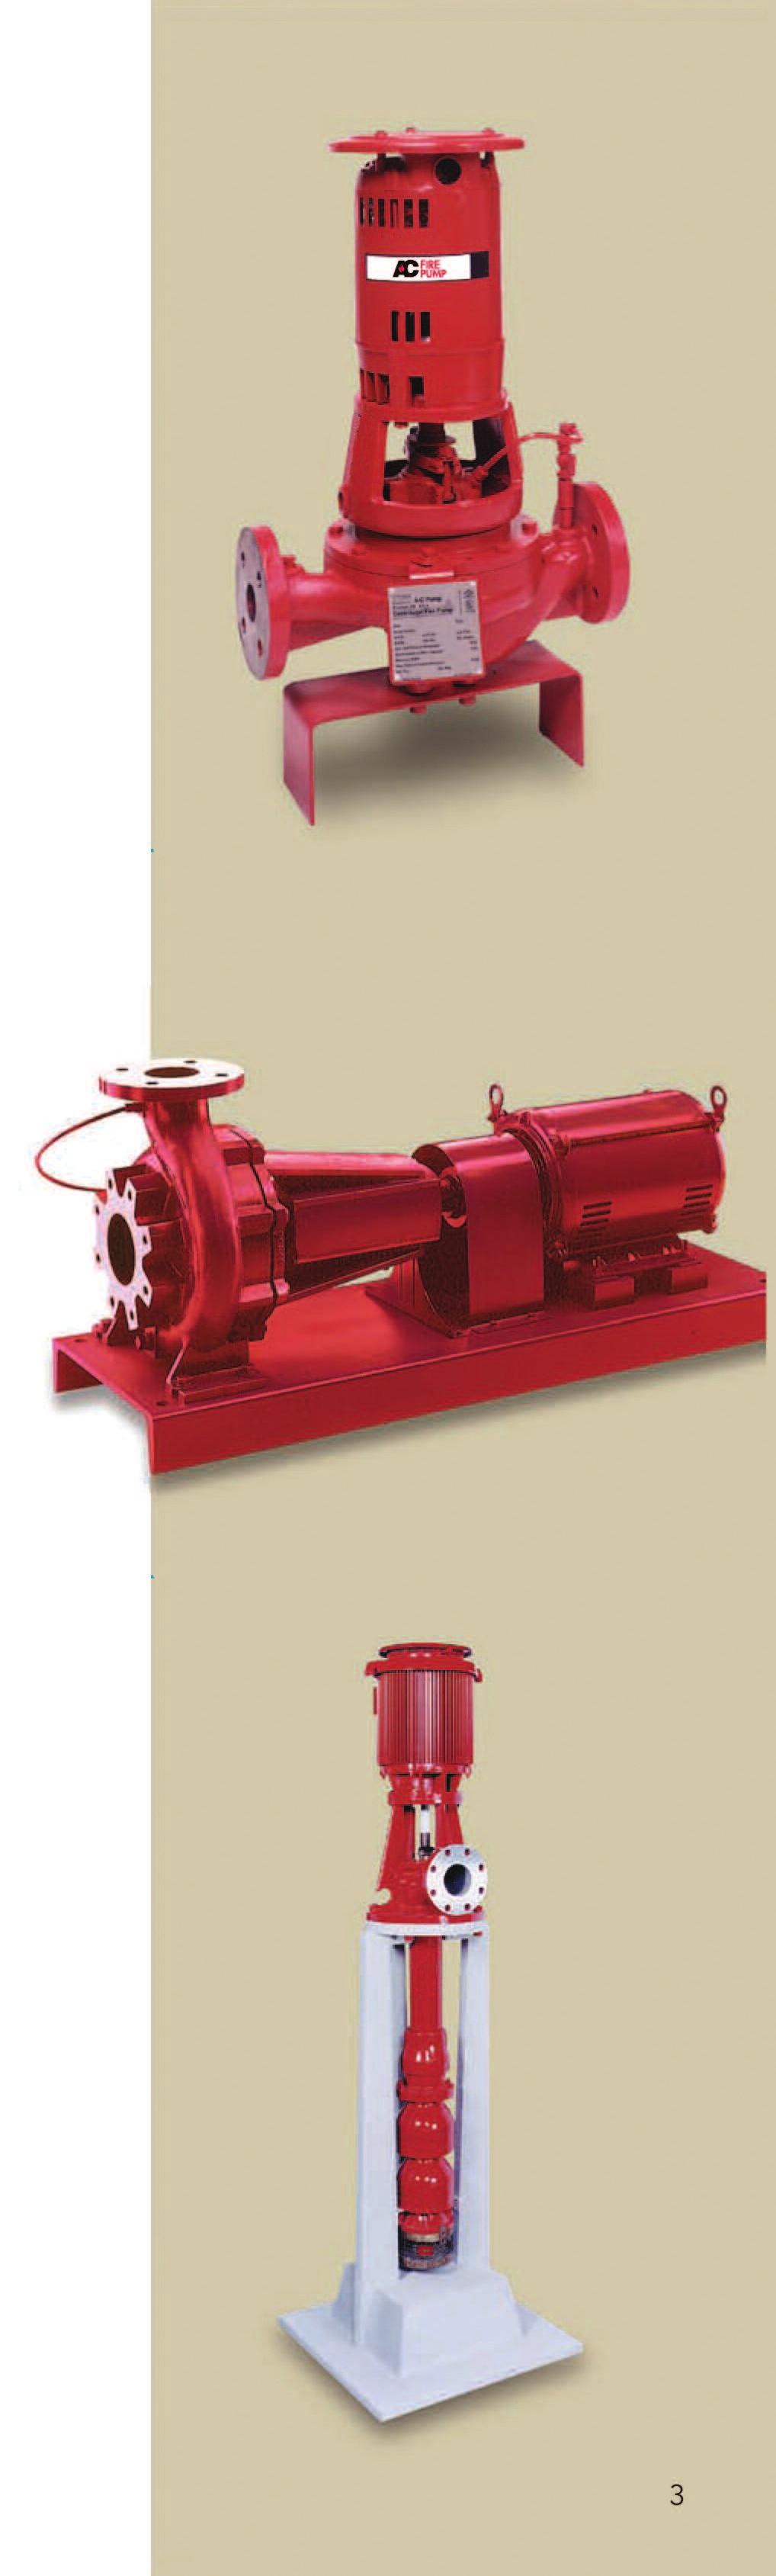 In-Line Pumps Capacity to 100 GPM (,78 L/min) Pressures to 1 PSI (11 m) Working Pressures to 10 PSI n Space saving design n No foundation or pads required.